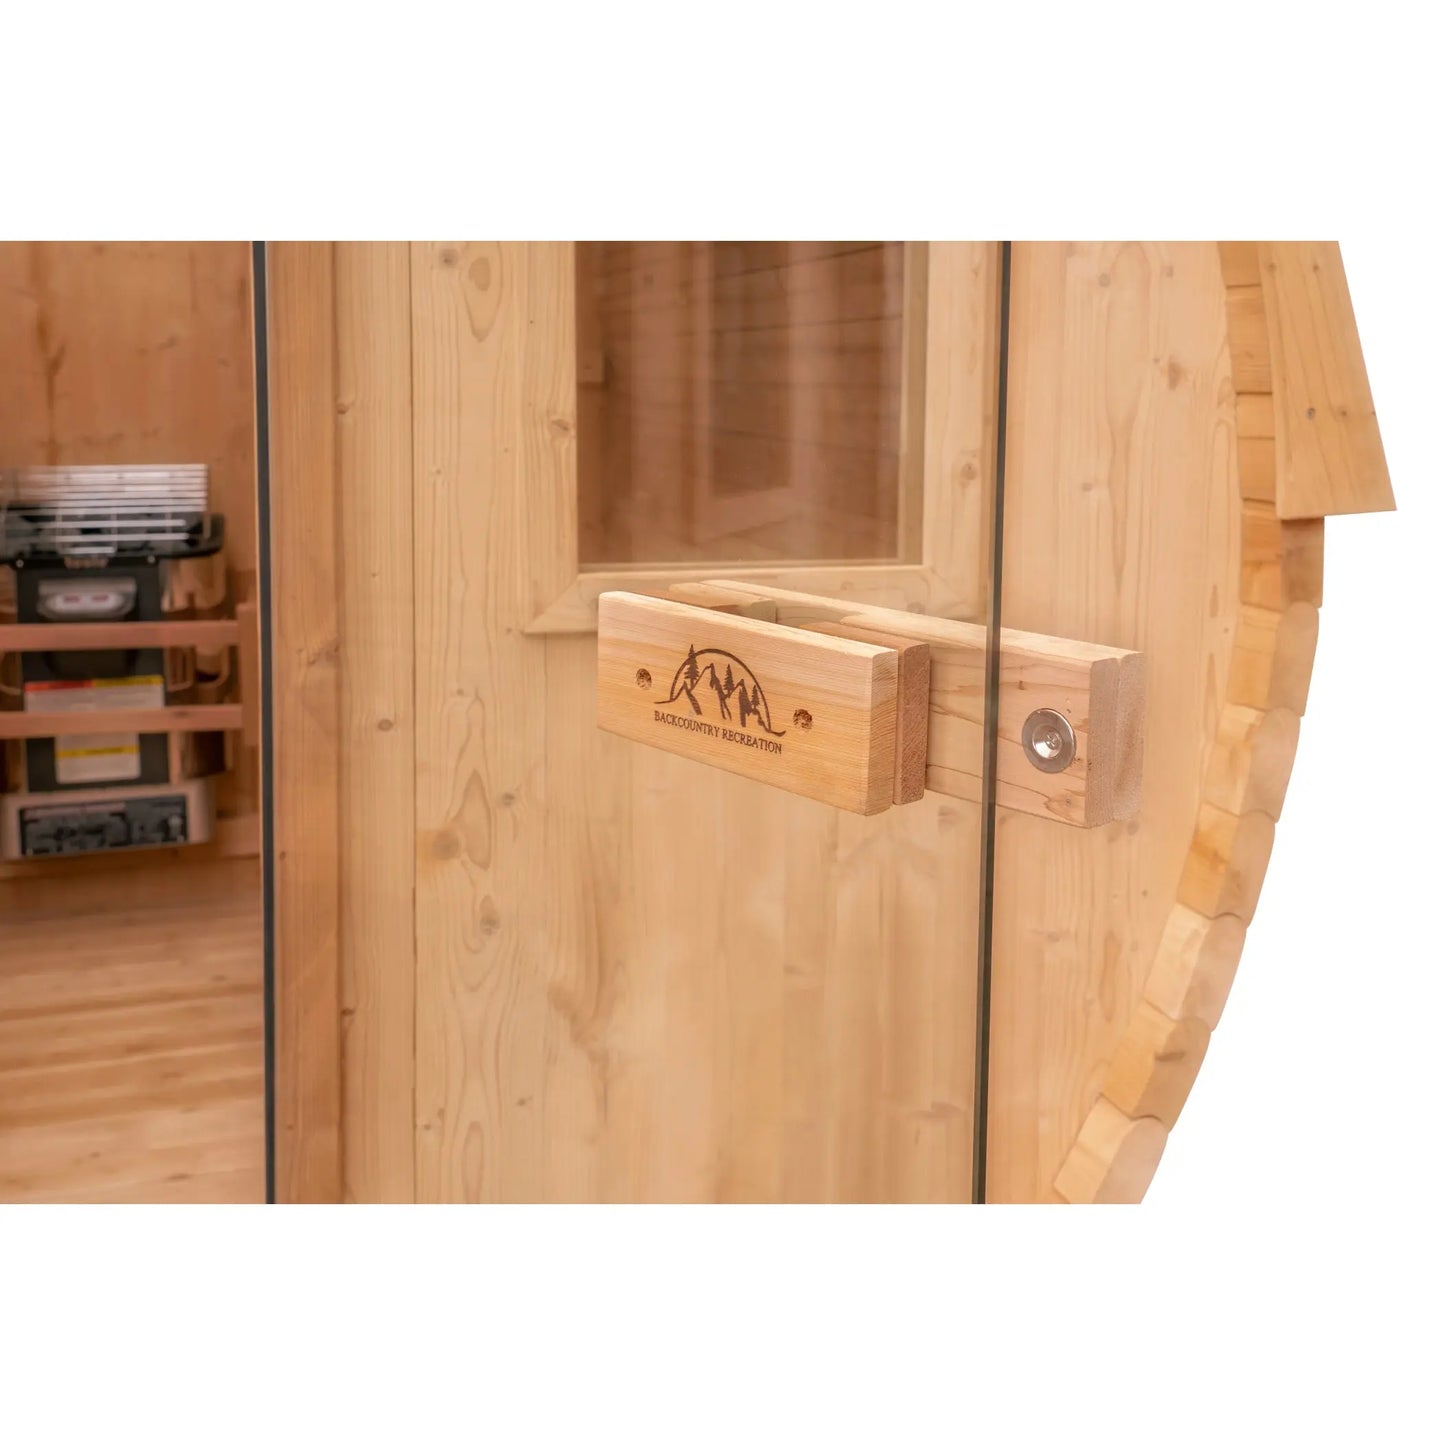 8 FT Classic Thermowood Barrel Sauna  - 6-8 Person Backcountry Recreation